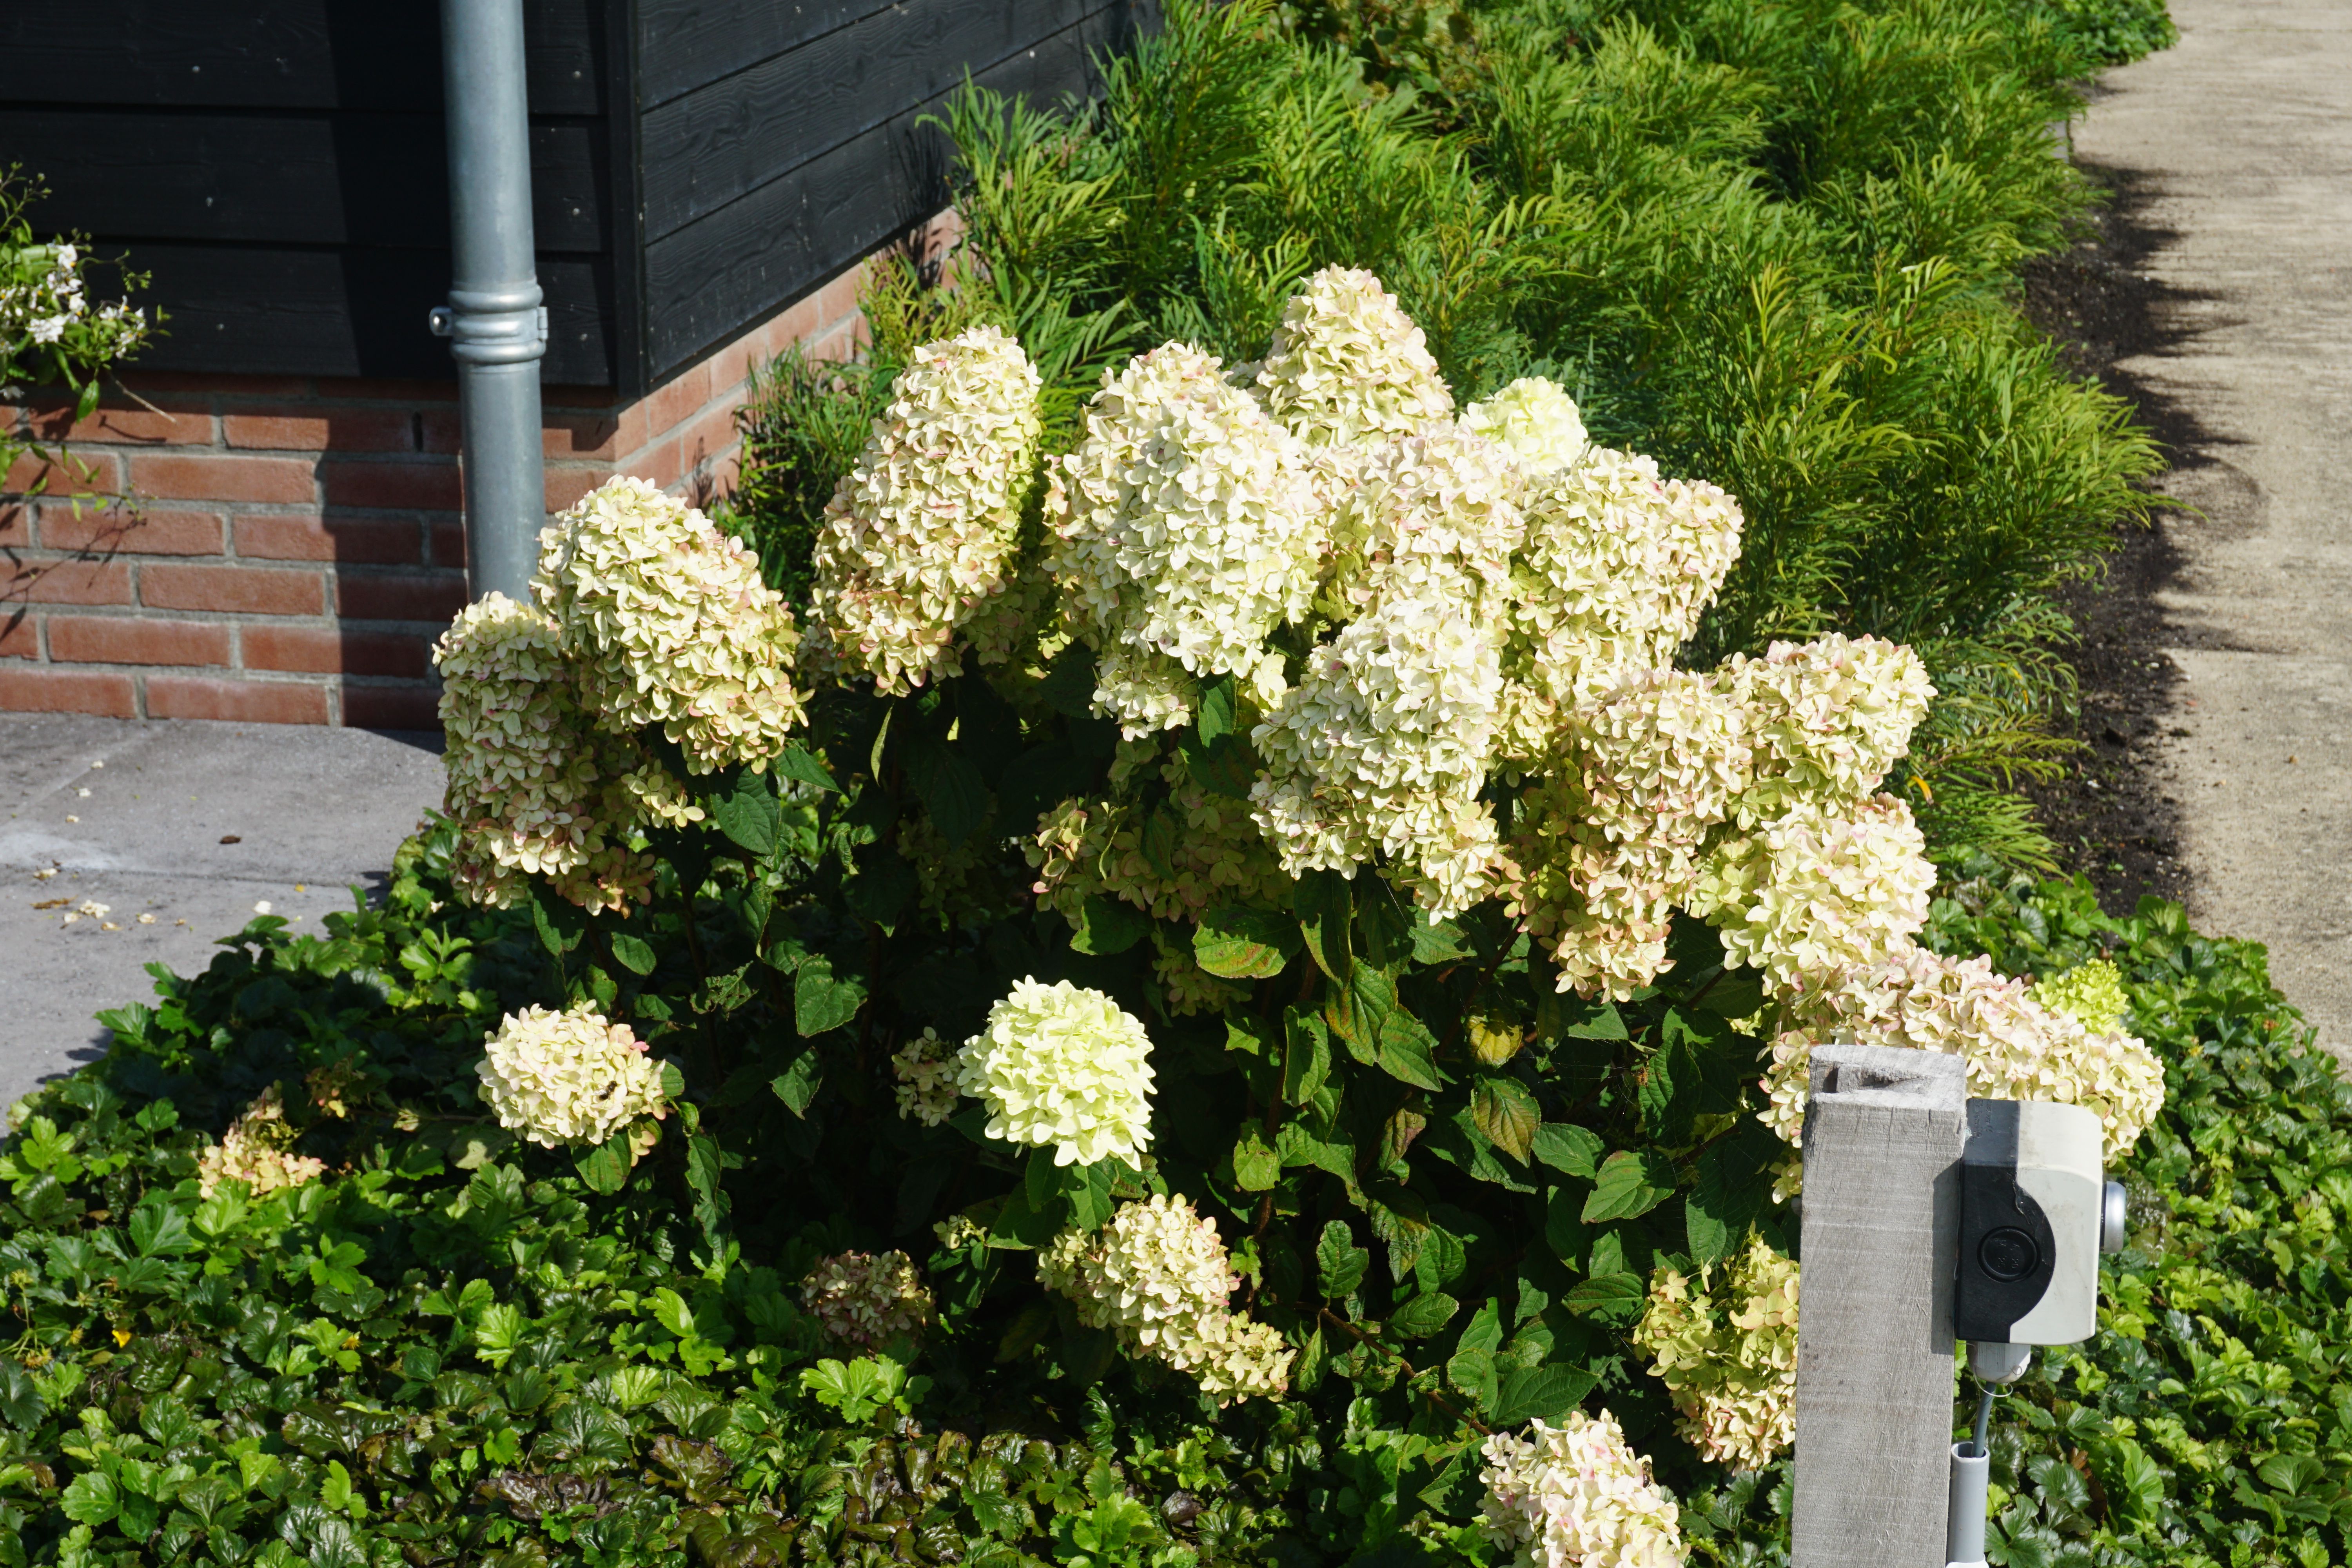 images/plants/hydrangea/hyd-magical-candle/hyd-magical-candle-0003.jpg